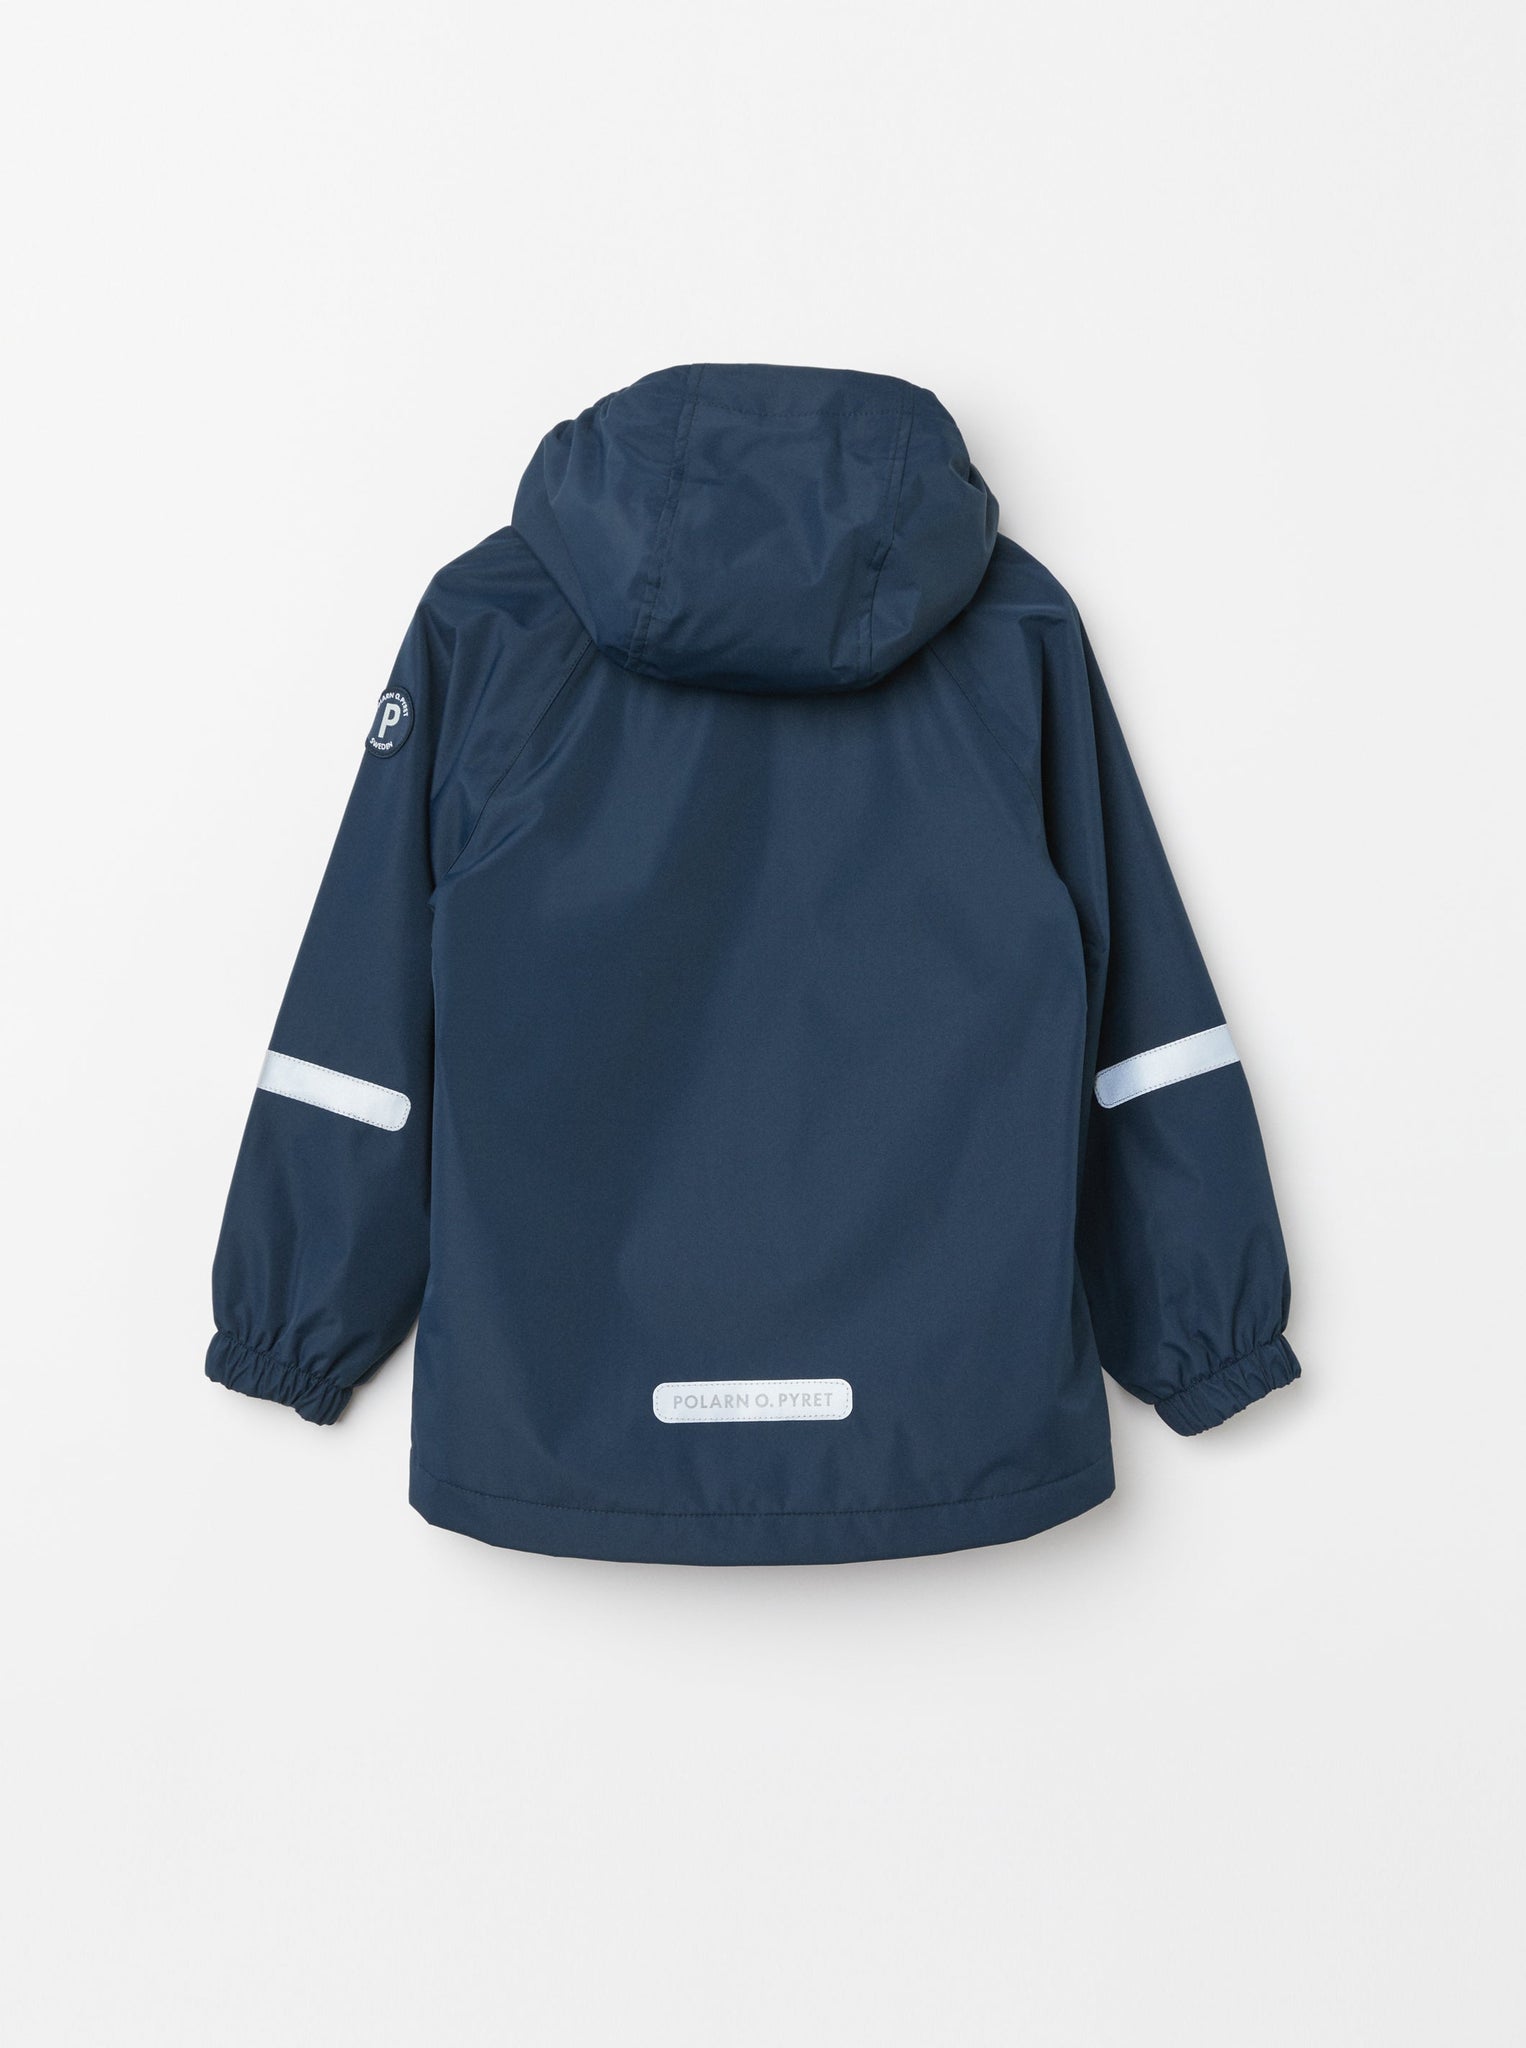 Navy Lightweight Kids Waterproof Coat from the Polarn O. Pyret kidswear collection. Sustainably produced kids outerwear.